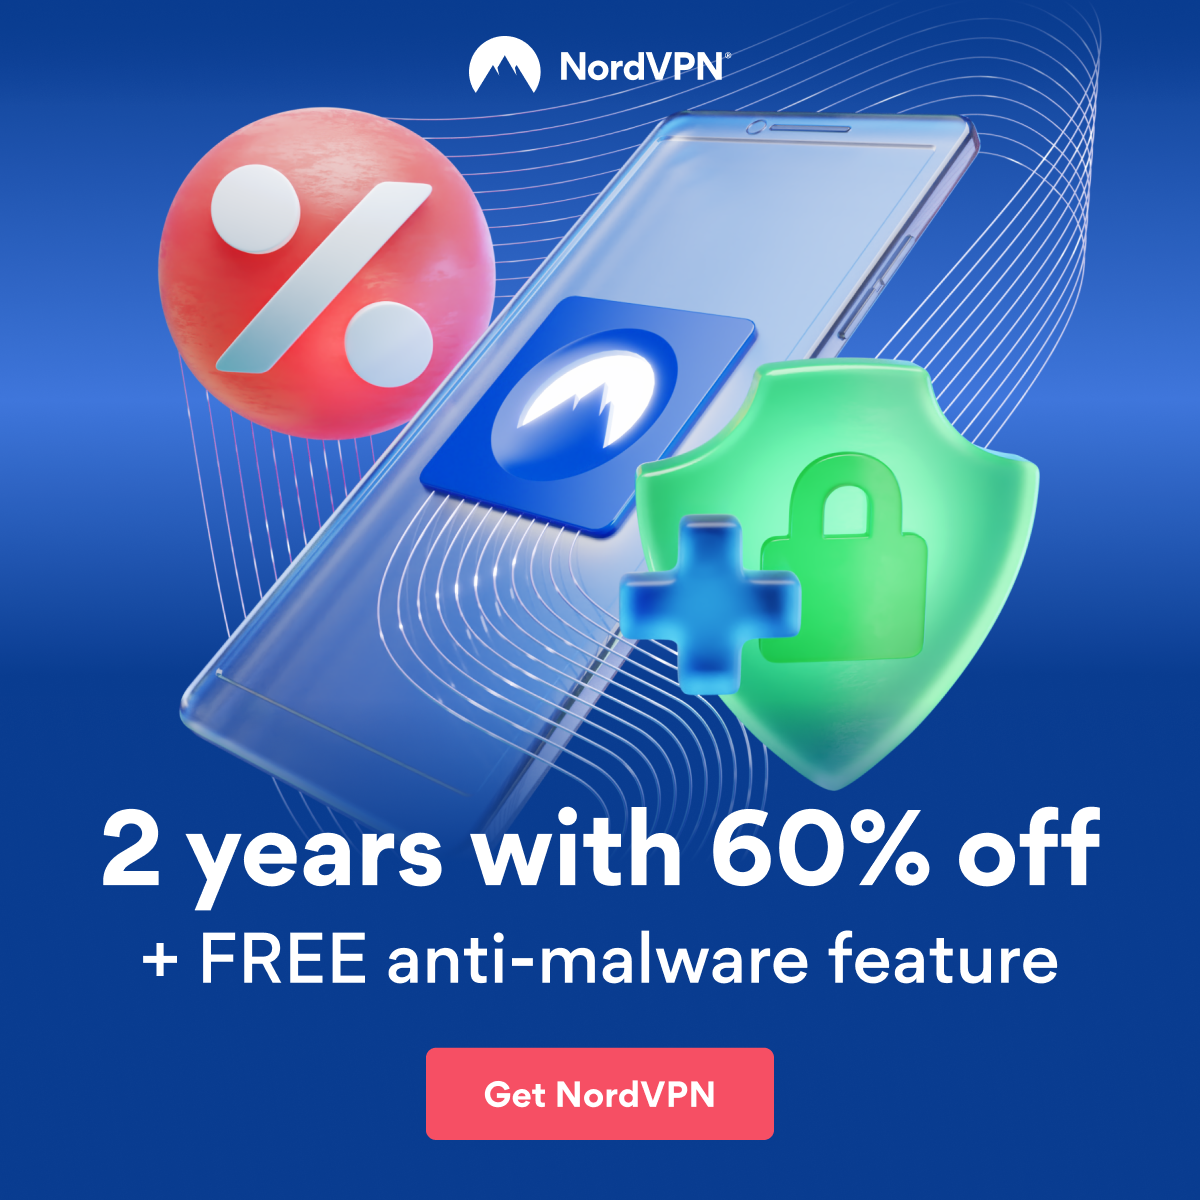 NordVPN Threat Protection Campaign